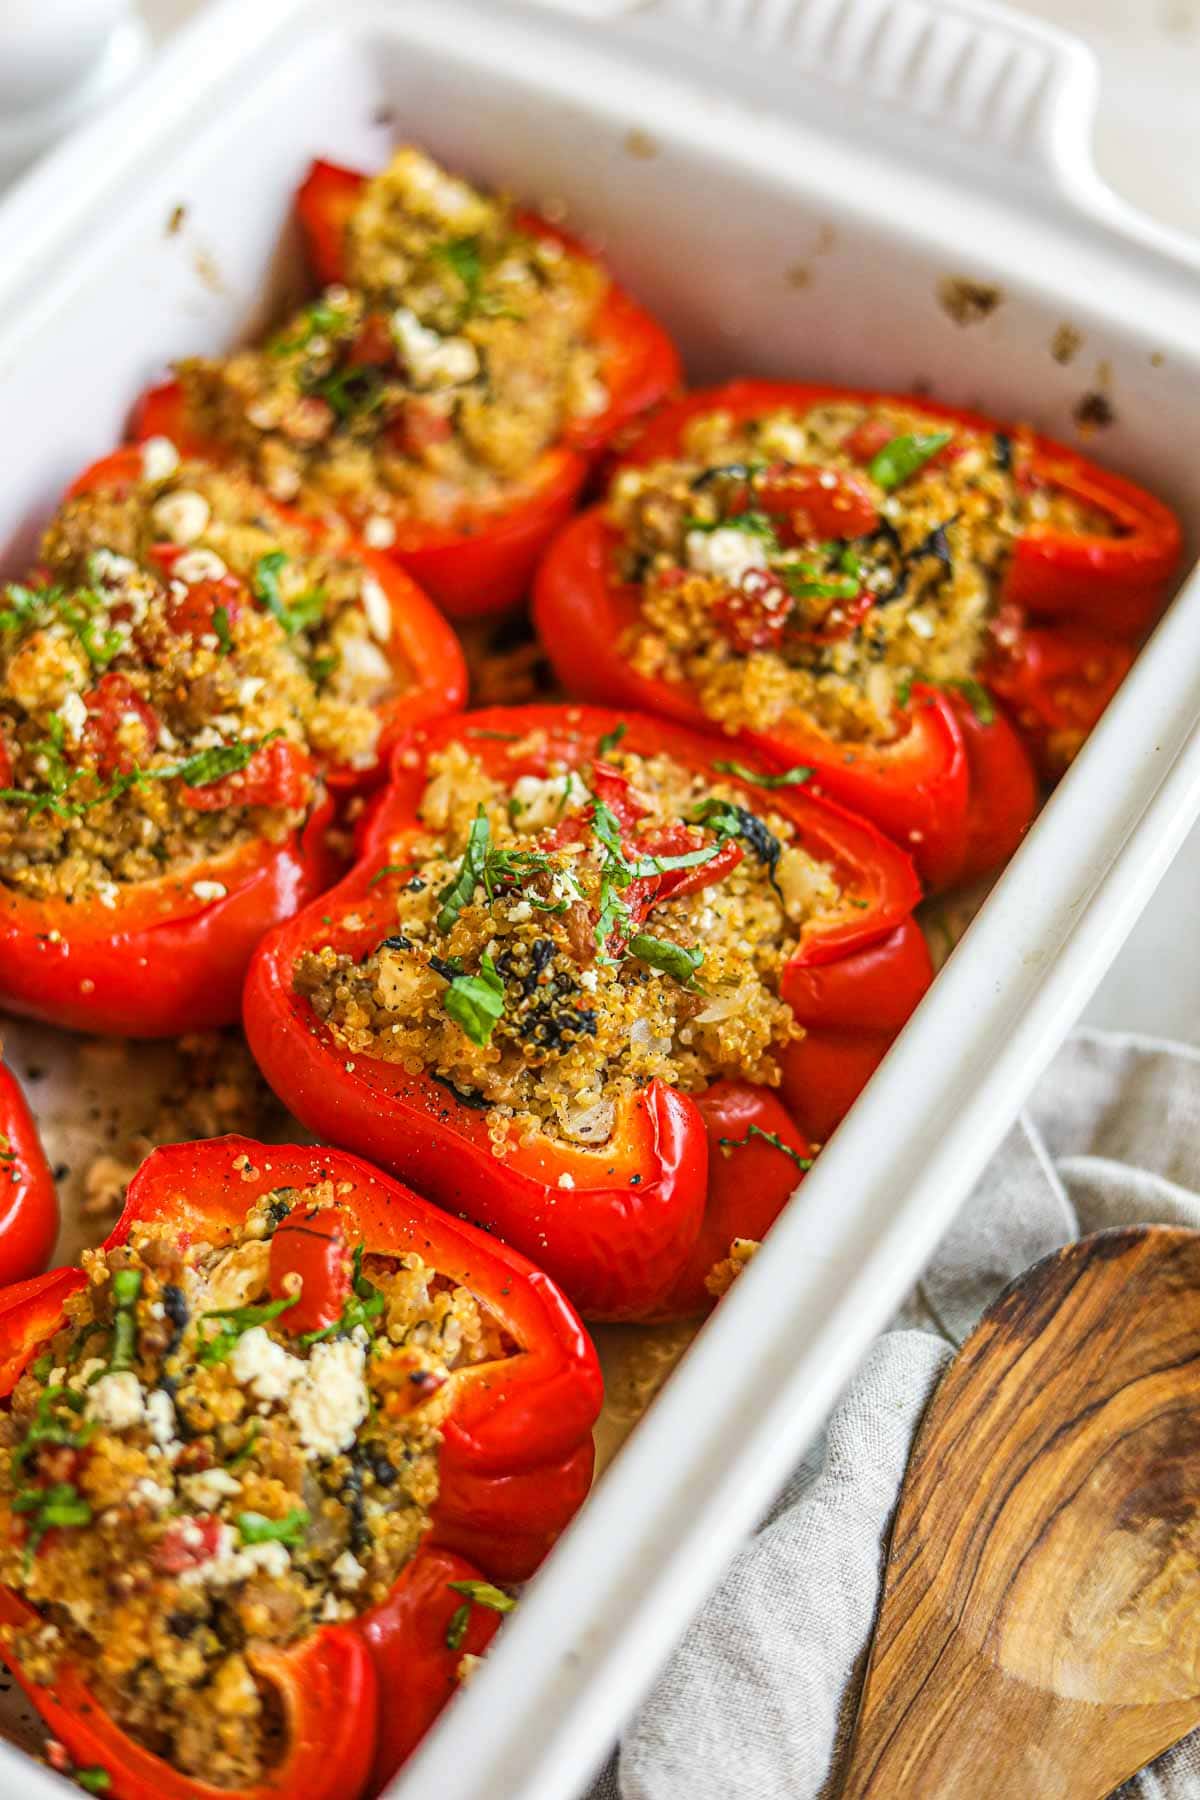 Baked quinoa and turkey stuffed peppers without rice in a Le Creuset baking dish.